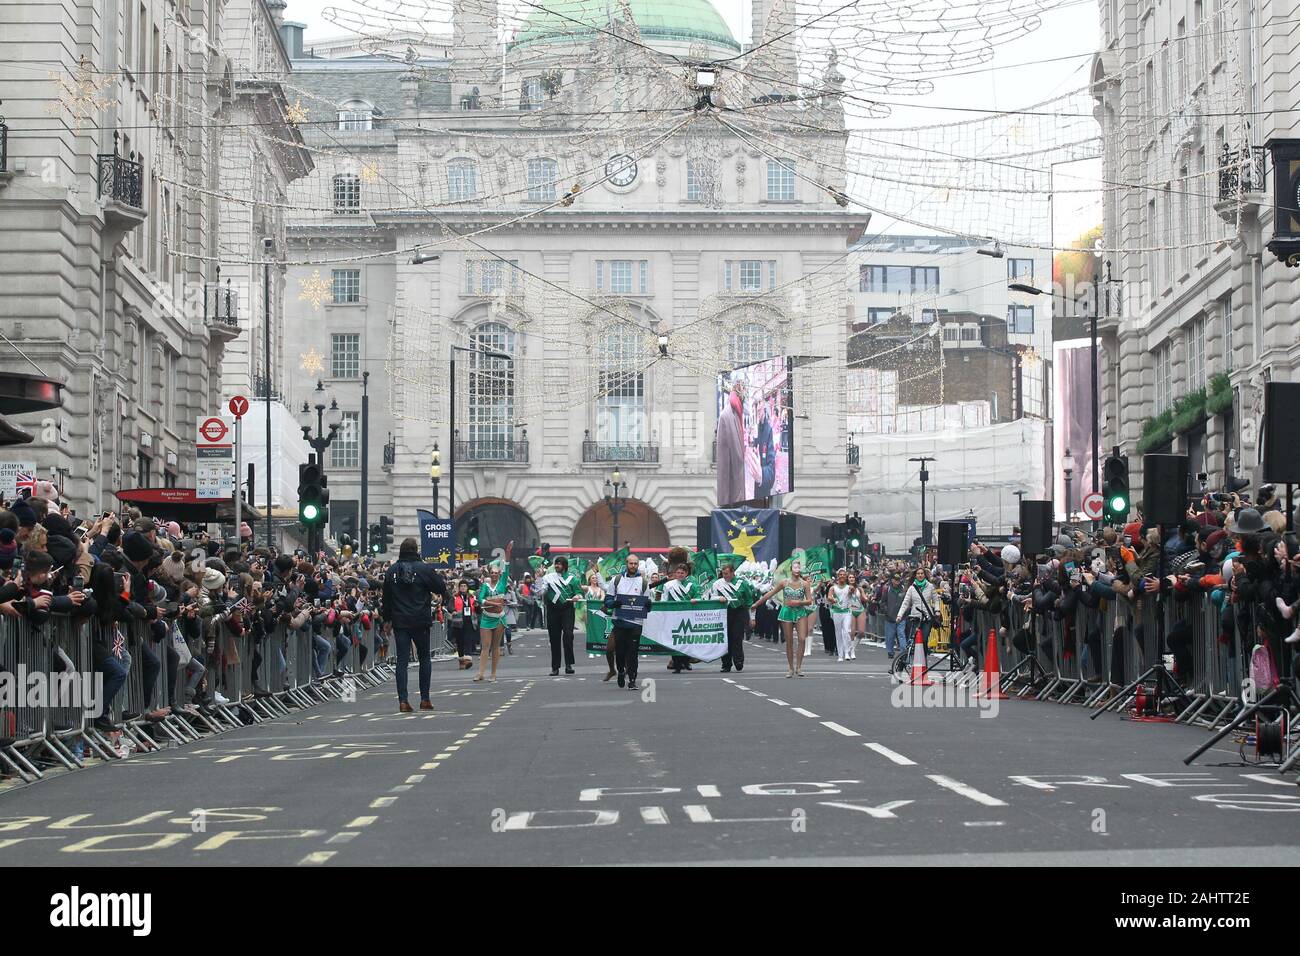 London, UK. 1st Jan, 2020. Performers perform at the London New Year's Day Parade 2020 Credit: WFPA/Alamy Live News Stock Photo